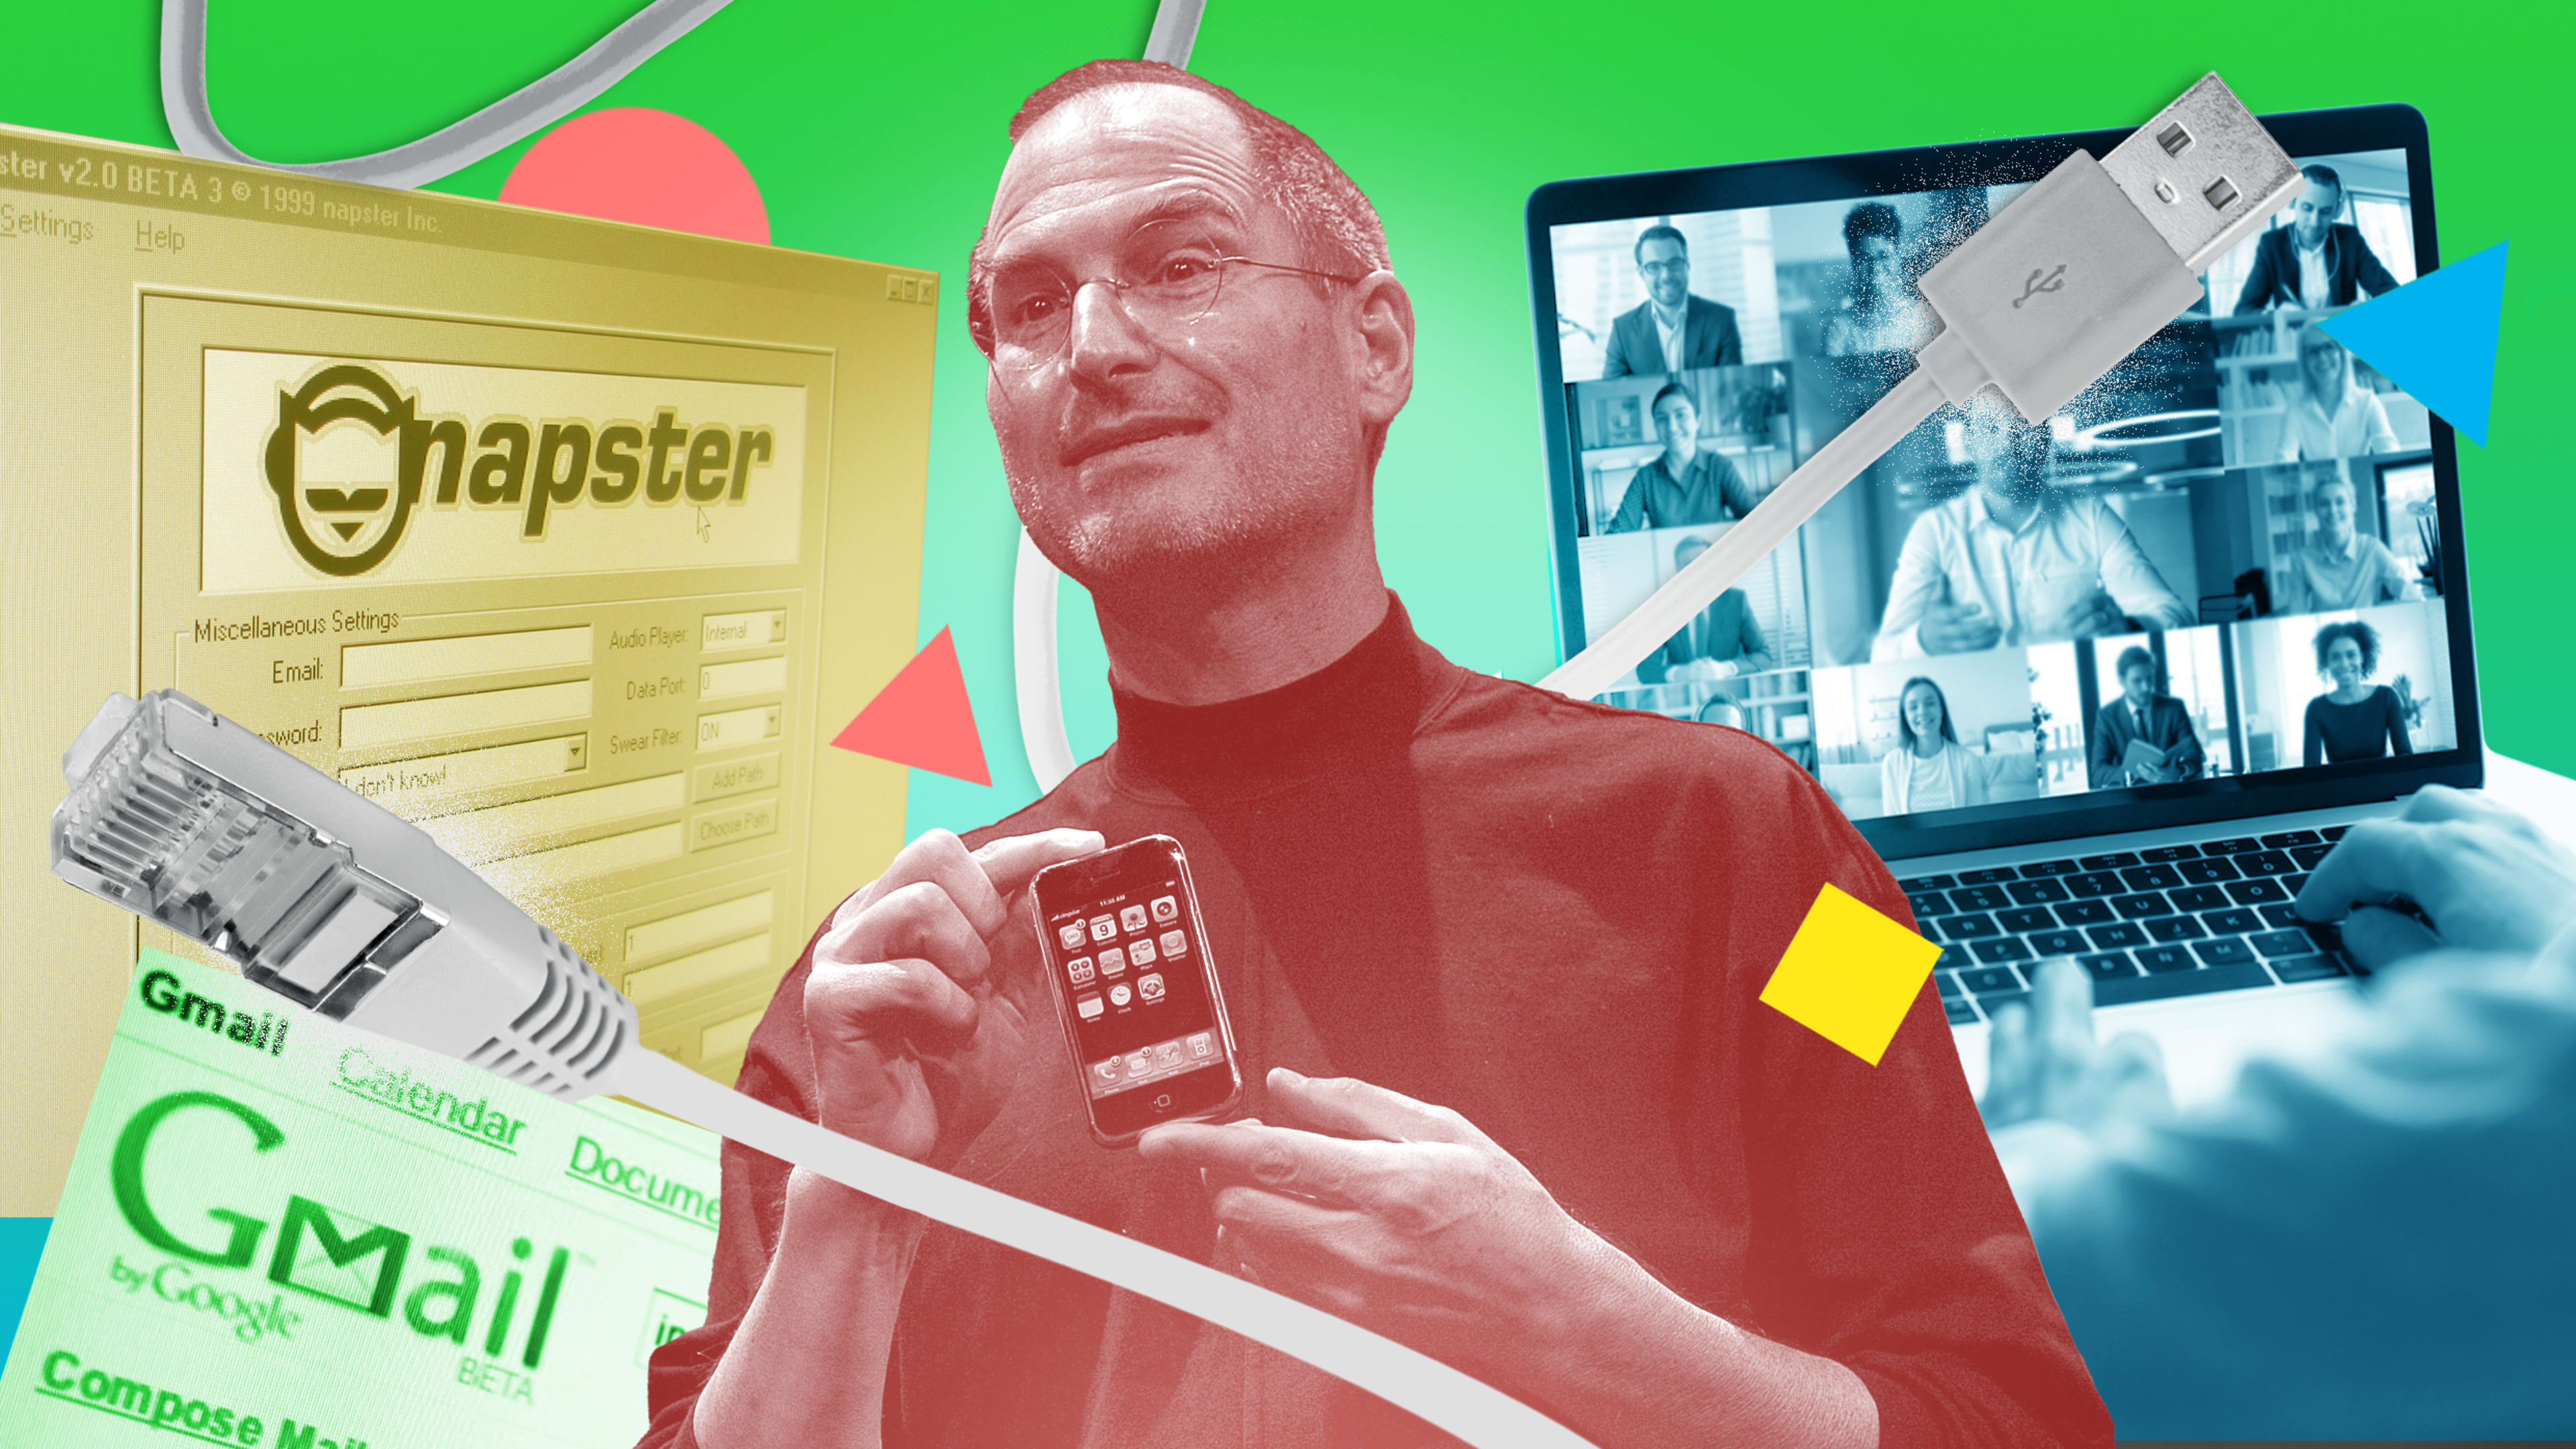 25 moments in tech that defined the past 25 years